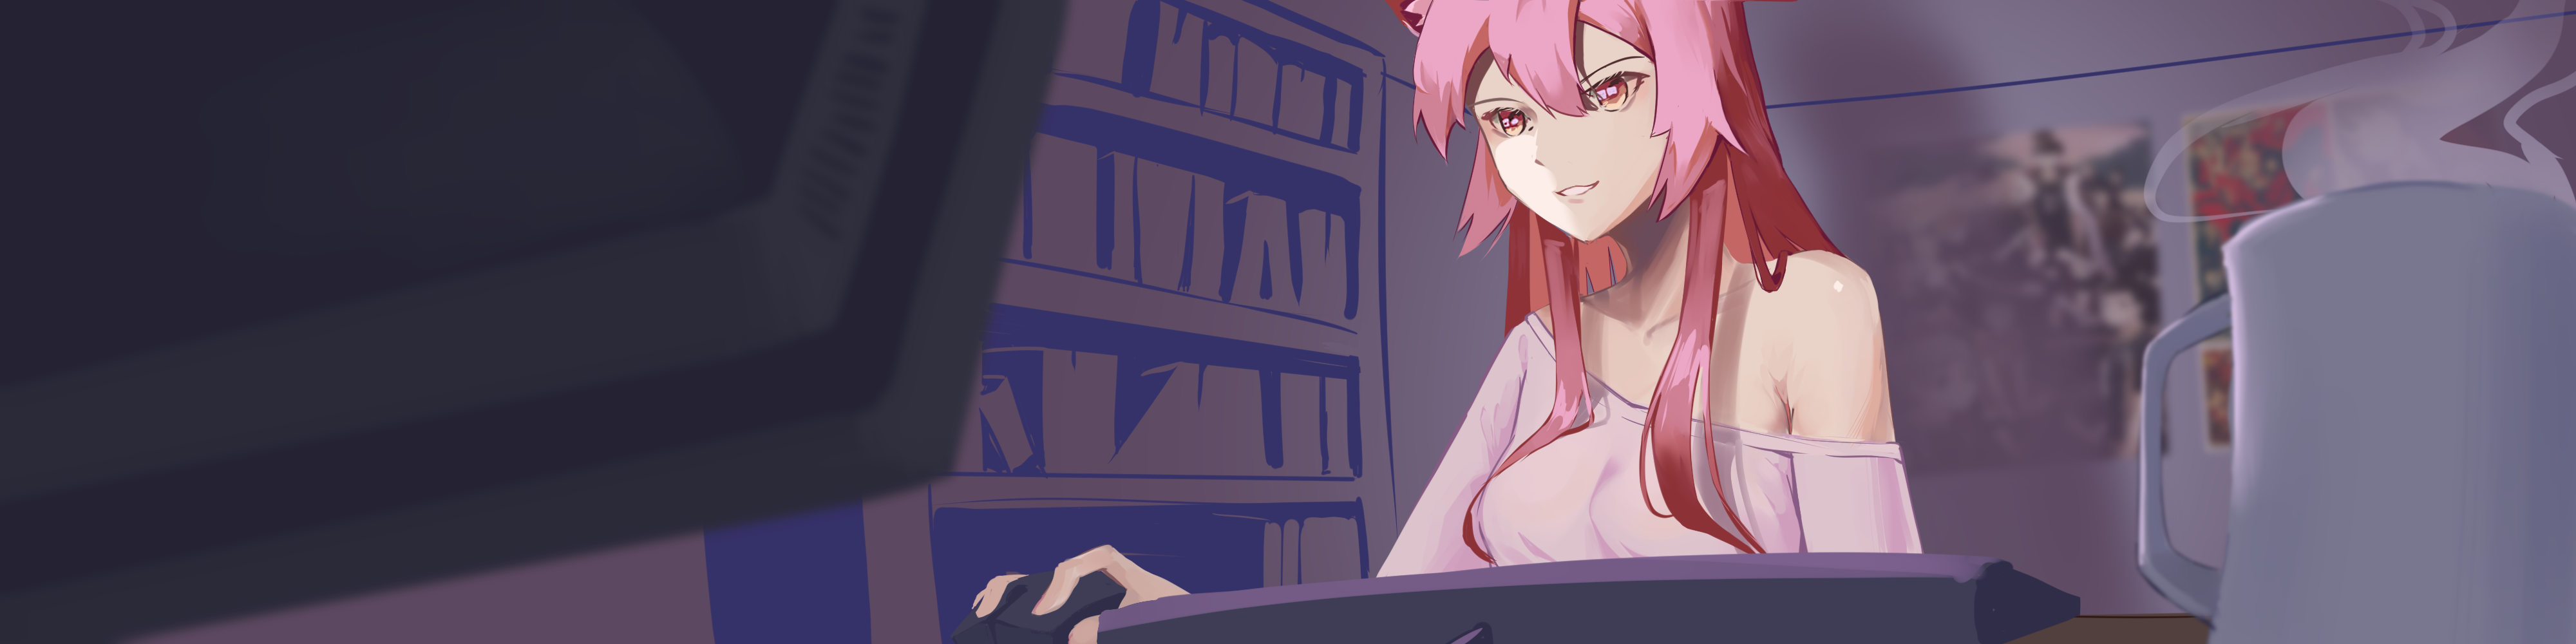 Amanda's avatar, a red-haired catgirl, sitting at a desk in front of a computer.